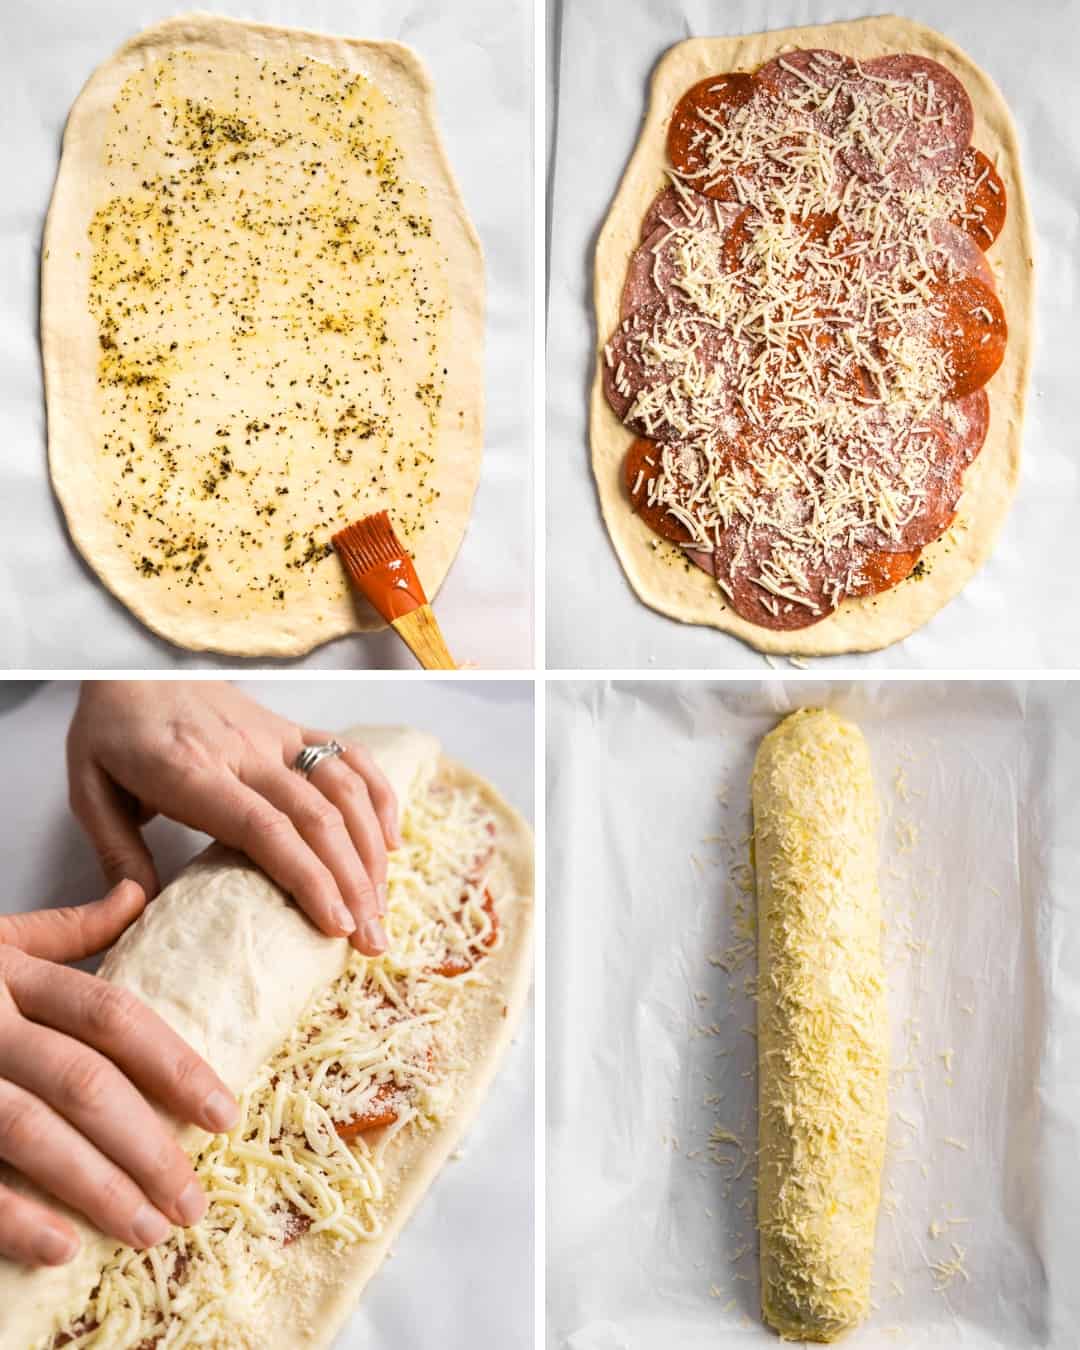 A collage of four images showing stromboli dough rolled out, with cheese and meats on top, rolling it up, and fully rolled up before baking.